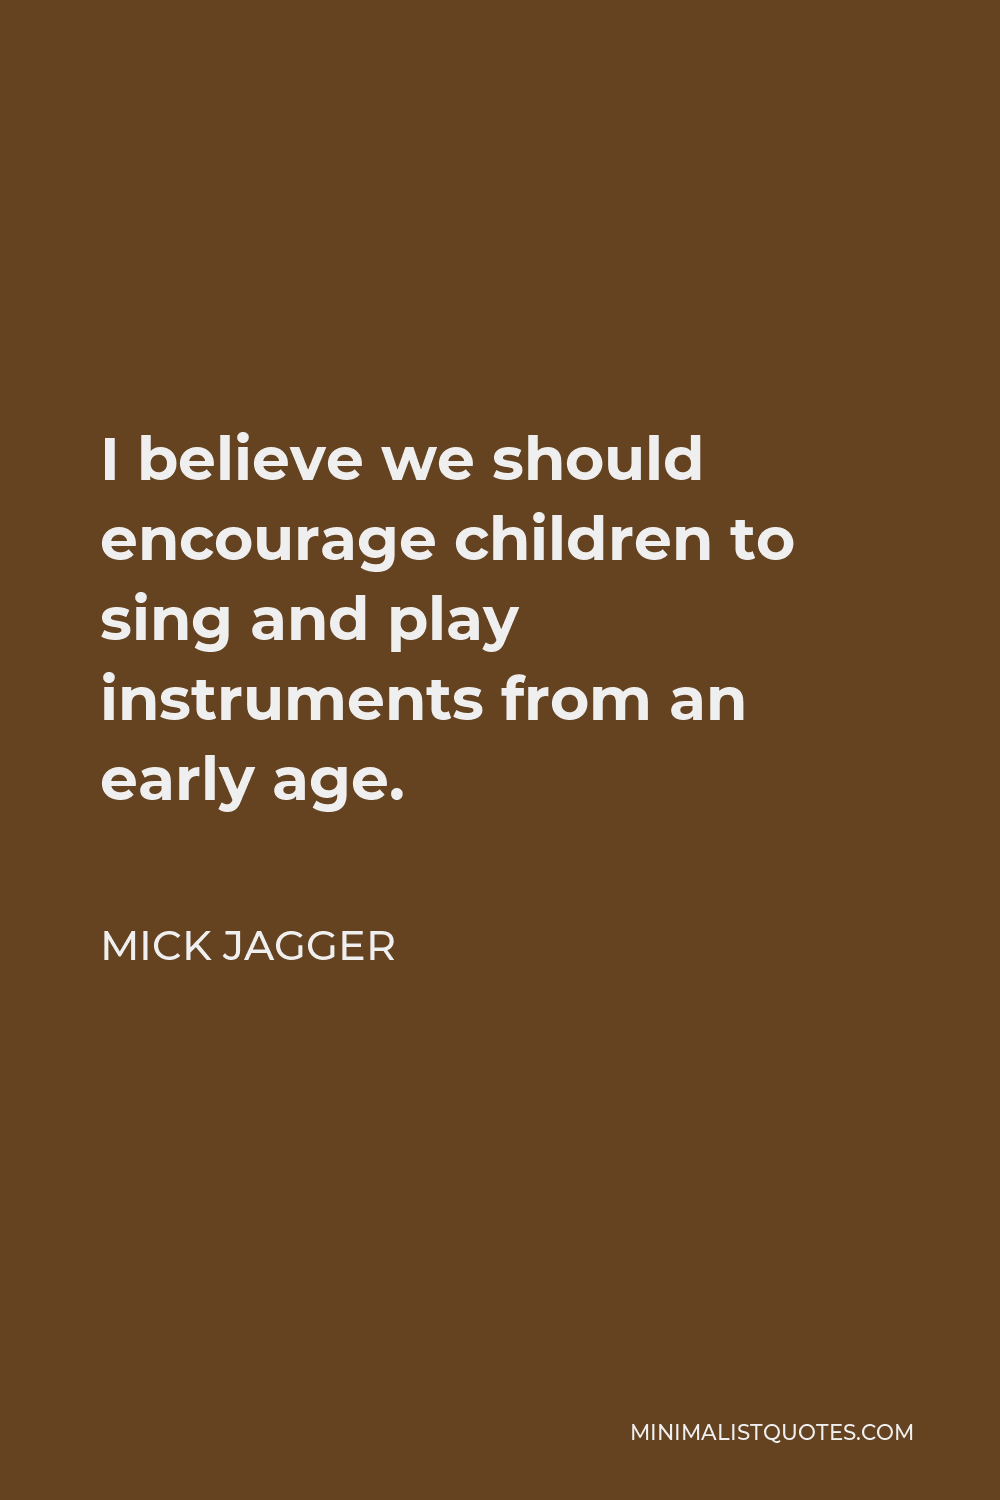 Mick Jagger Quote - I believe we should encourage children to sing and play instruments from an early age.